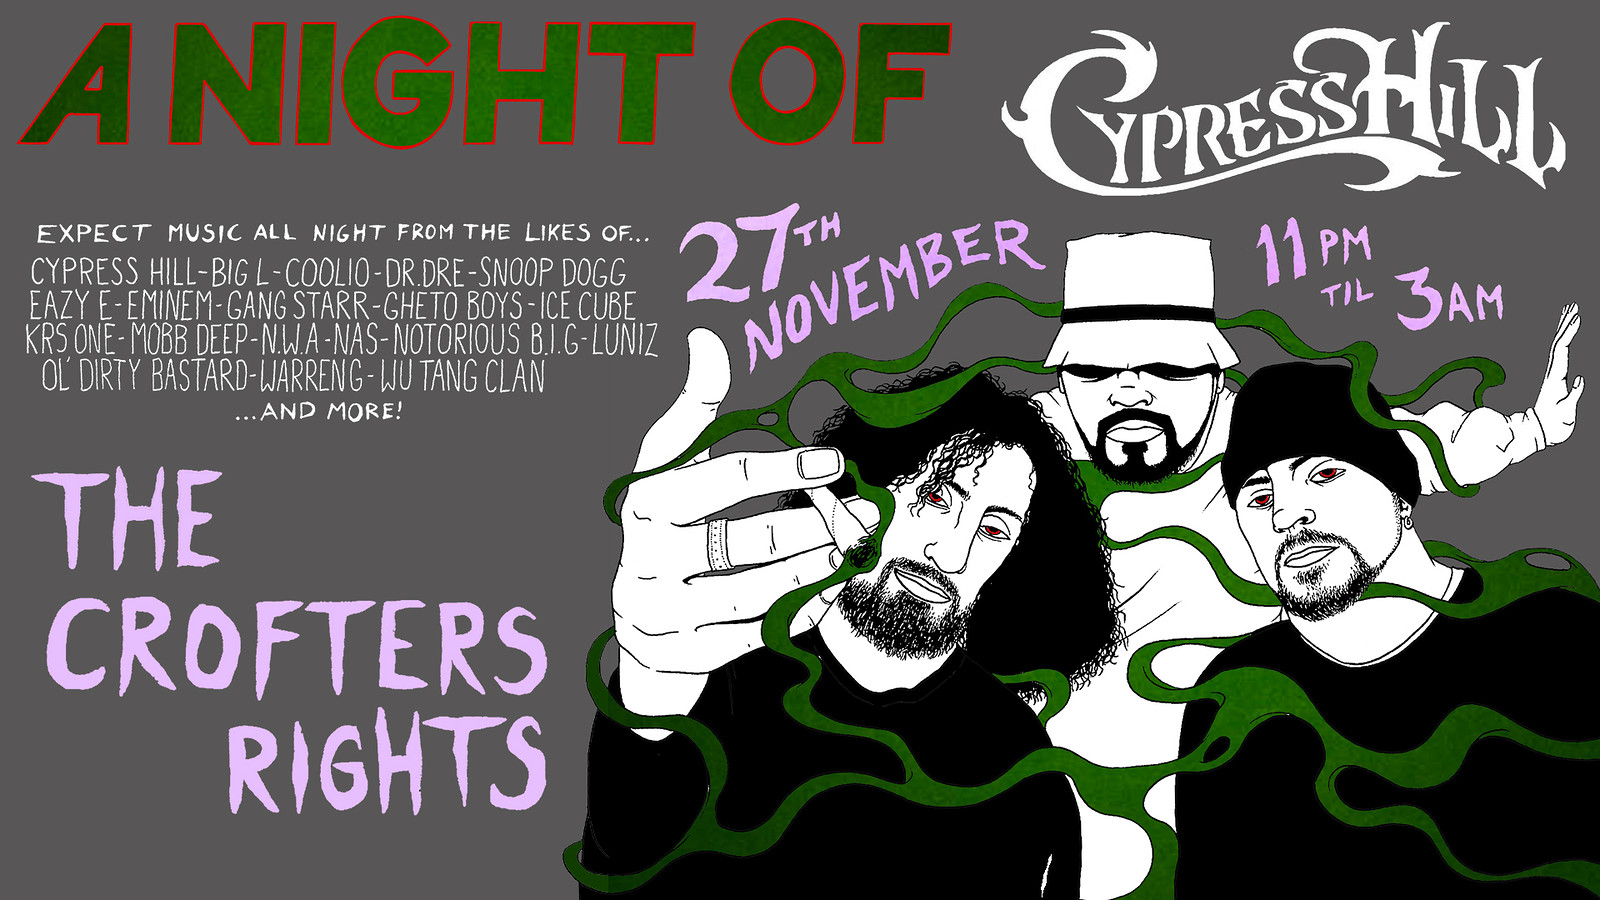 A Night Of: Cypress Hill at Crofters Rights